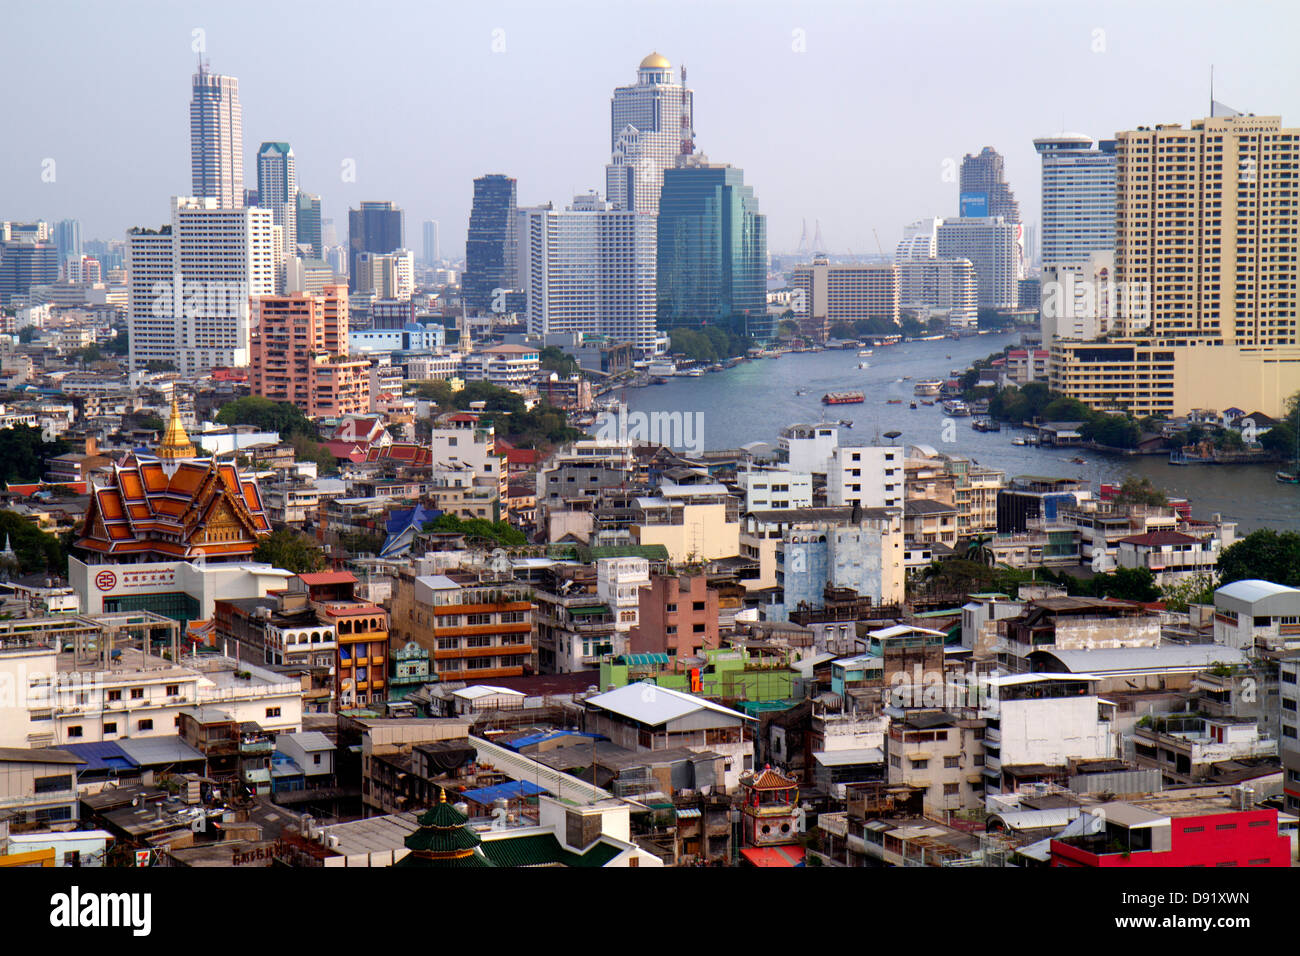 Bangkok Thailand,Thai,Samphanthawong,Chinatown,aerial overhead view from above,view,buildings,urban,city skyline,skyscrapers,Chao Phraya River,temple, Stock Photo